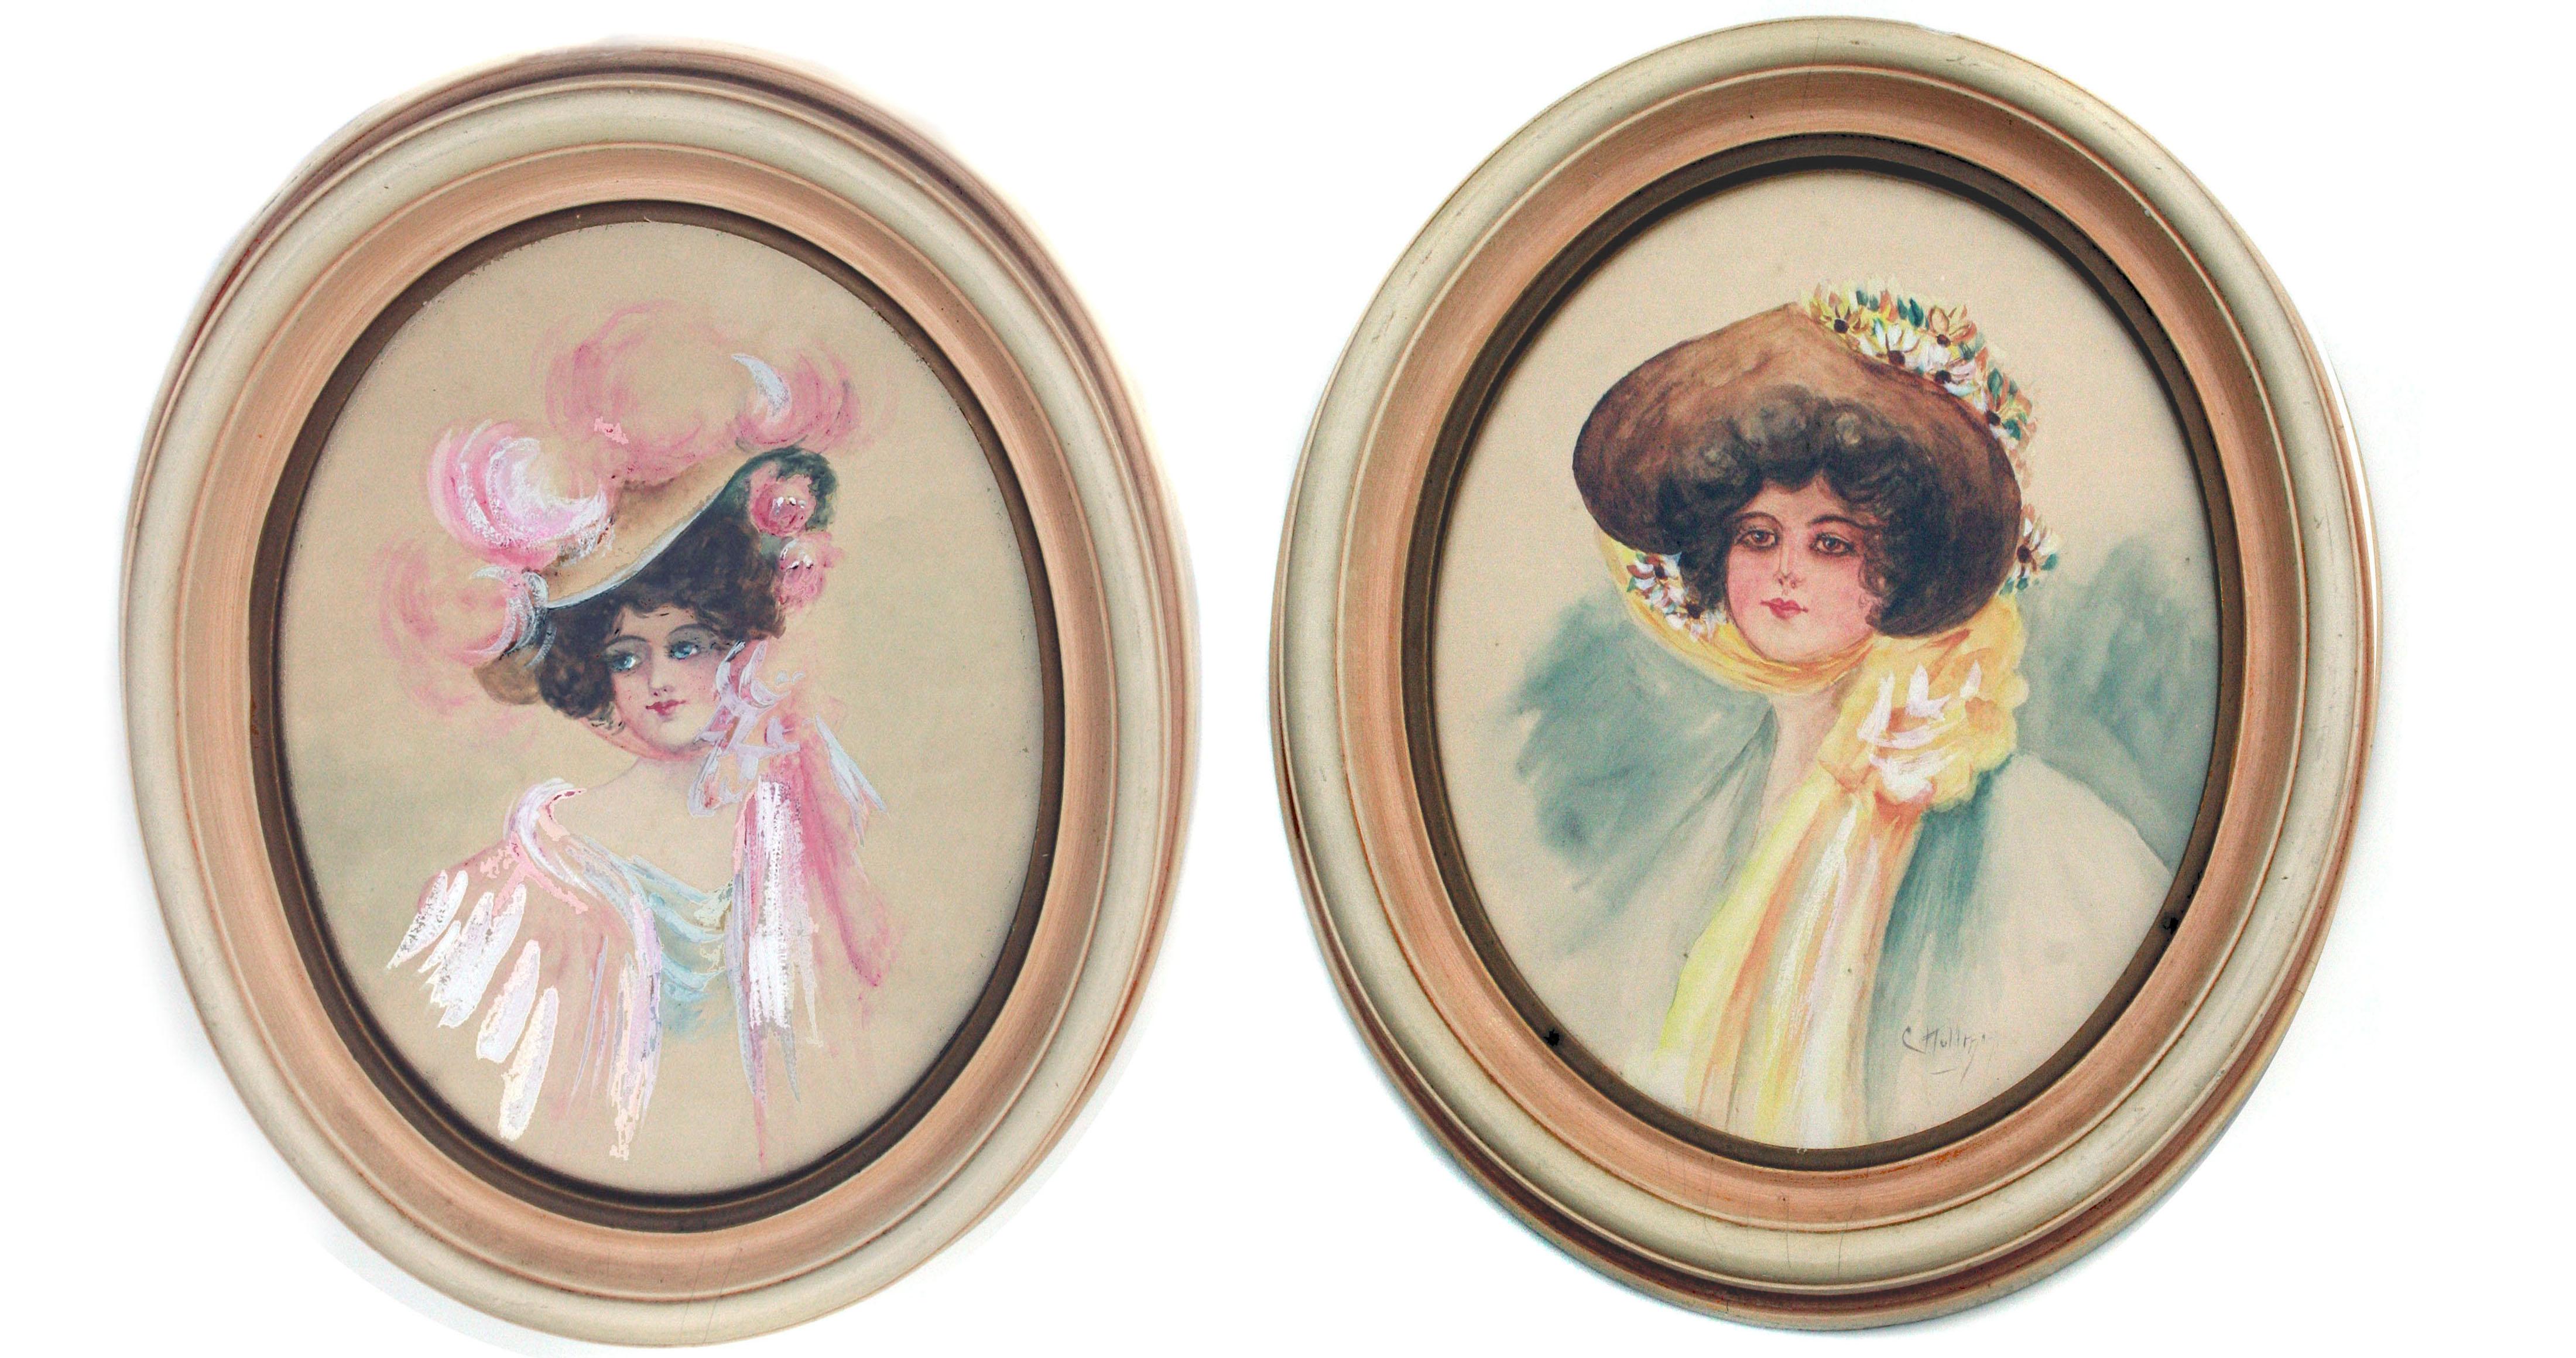 Gibson Girls - Set of Two 1920's Portraits, Vintage Fashion Illustrations